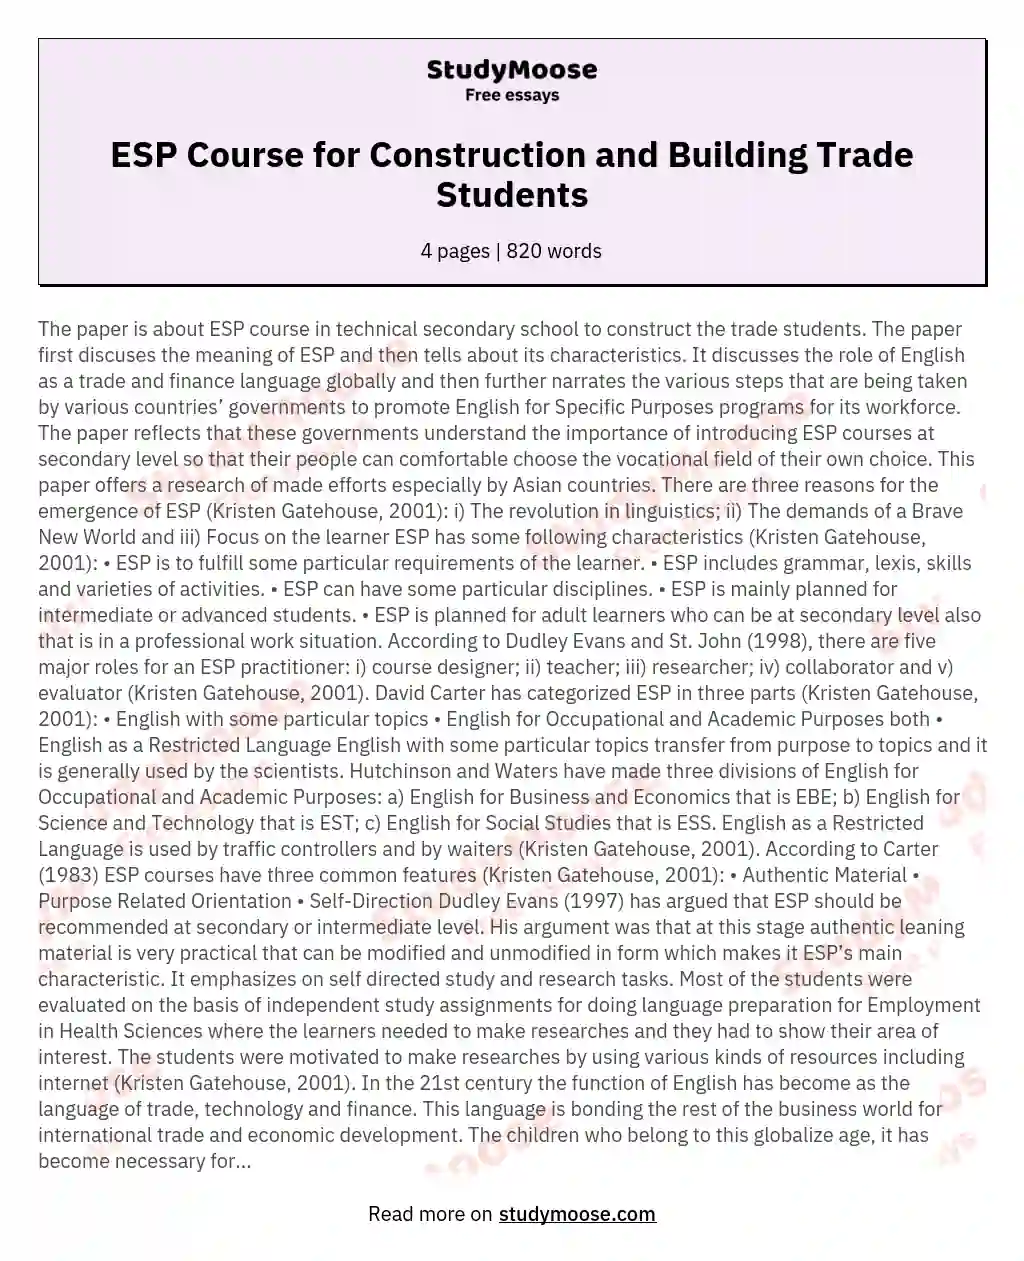 ESP Course at Technical Secondary Vocational School for Construction and Building Trade students